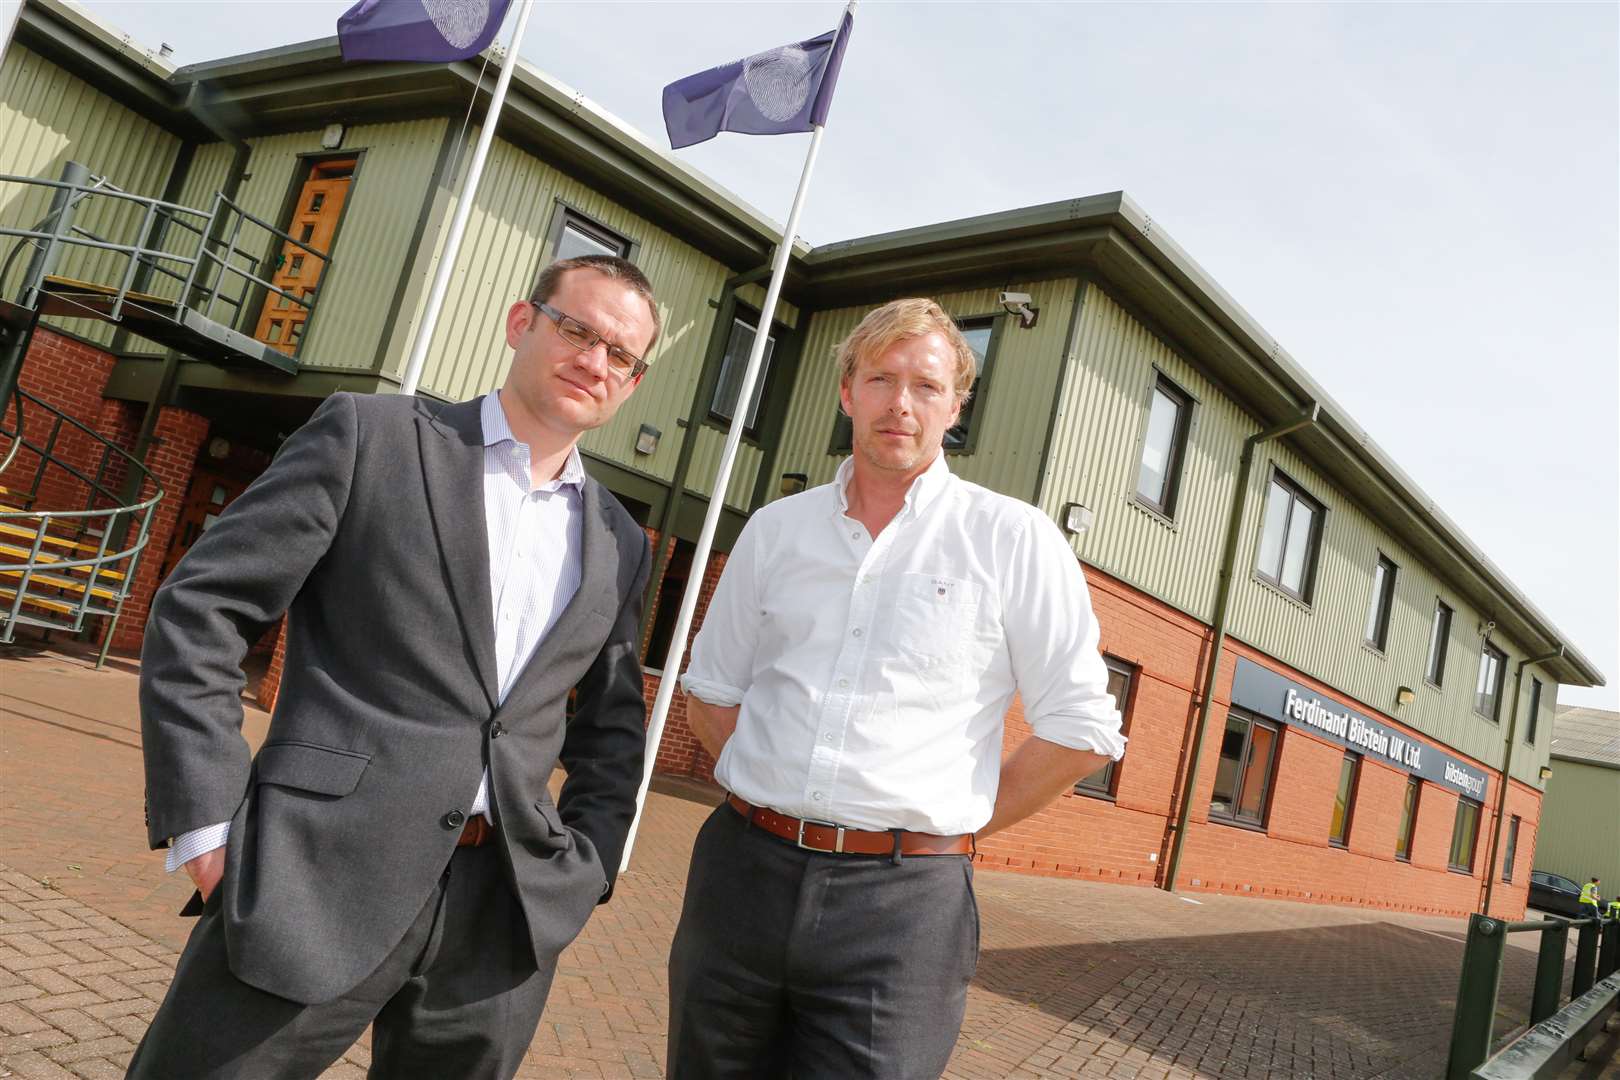 Operations director Paul Dodgson and managing director Mark Northeast